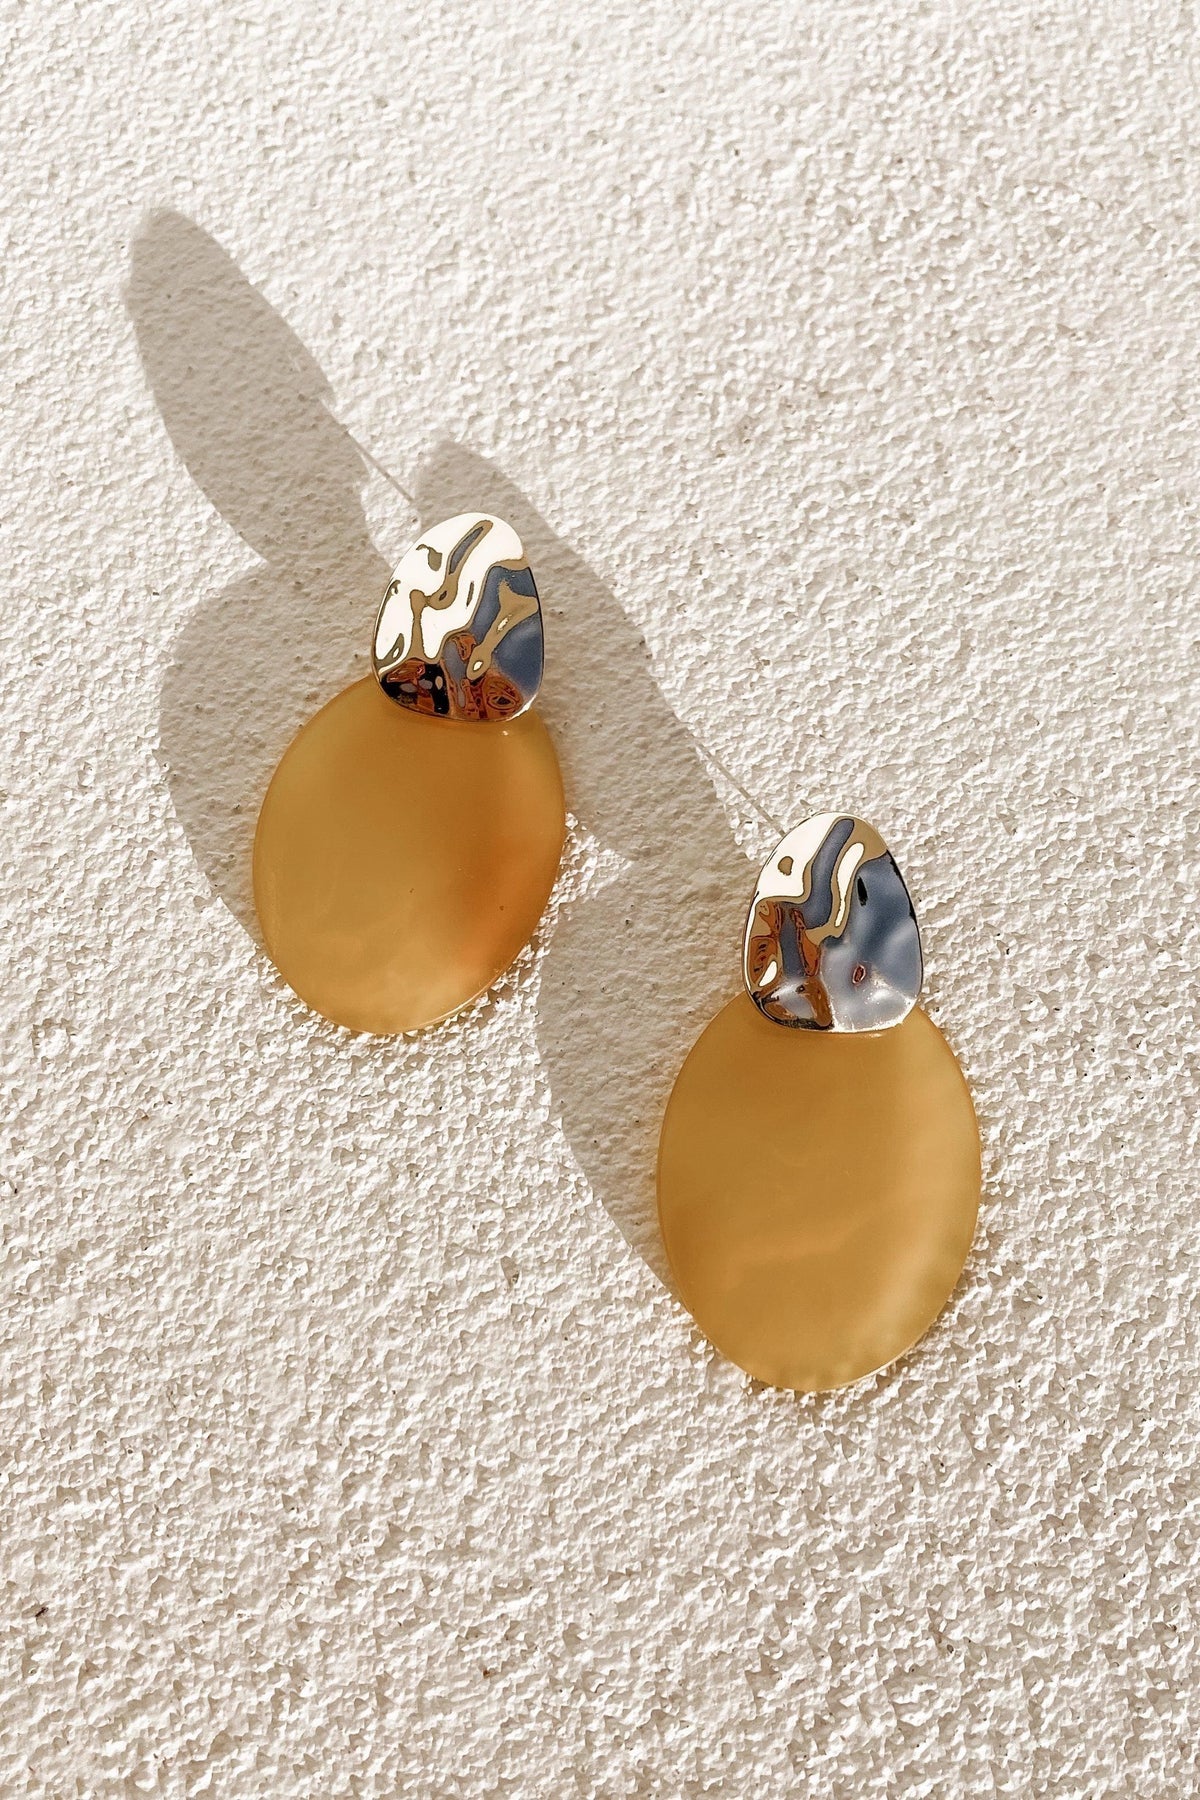 Marika Earrings, ACCESSORIES, EARRINGS, GOLD, JEWELLERY, NEW ARRIVALS, YELLOW, Our New Marika Earrings Is Now Only $33.00 Exclusive At Mishkah, We Have The Latest Fashion Accessories @ Mishkah Online Fashion Boutique Our New Marika Earrings is now only $33.00-MISHKAH